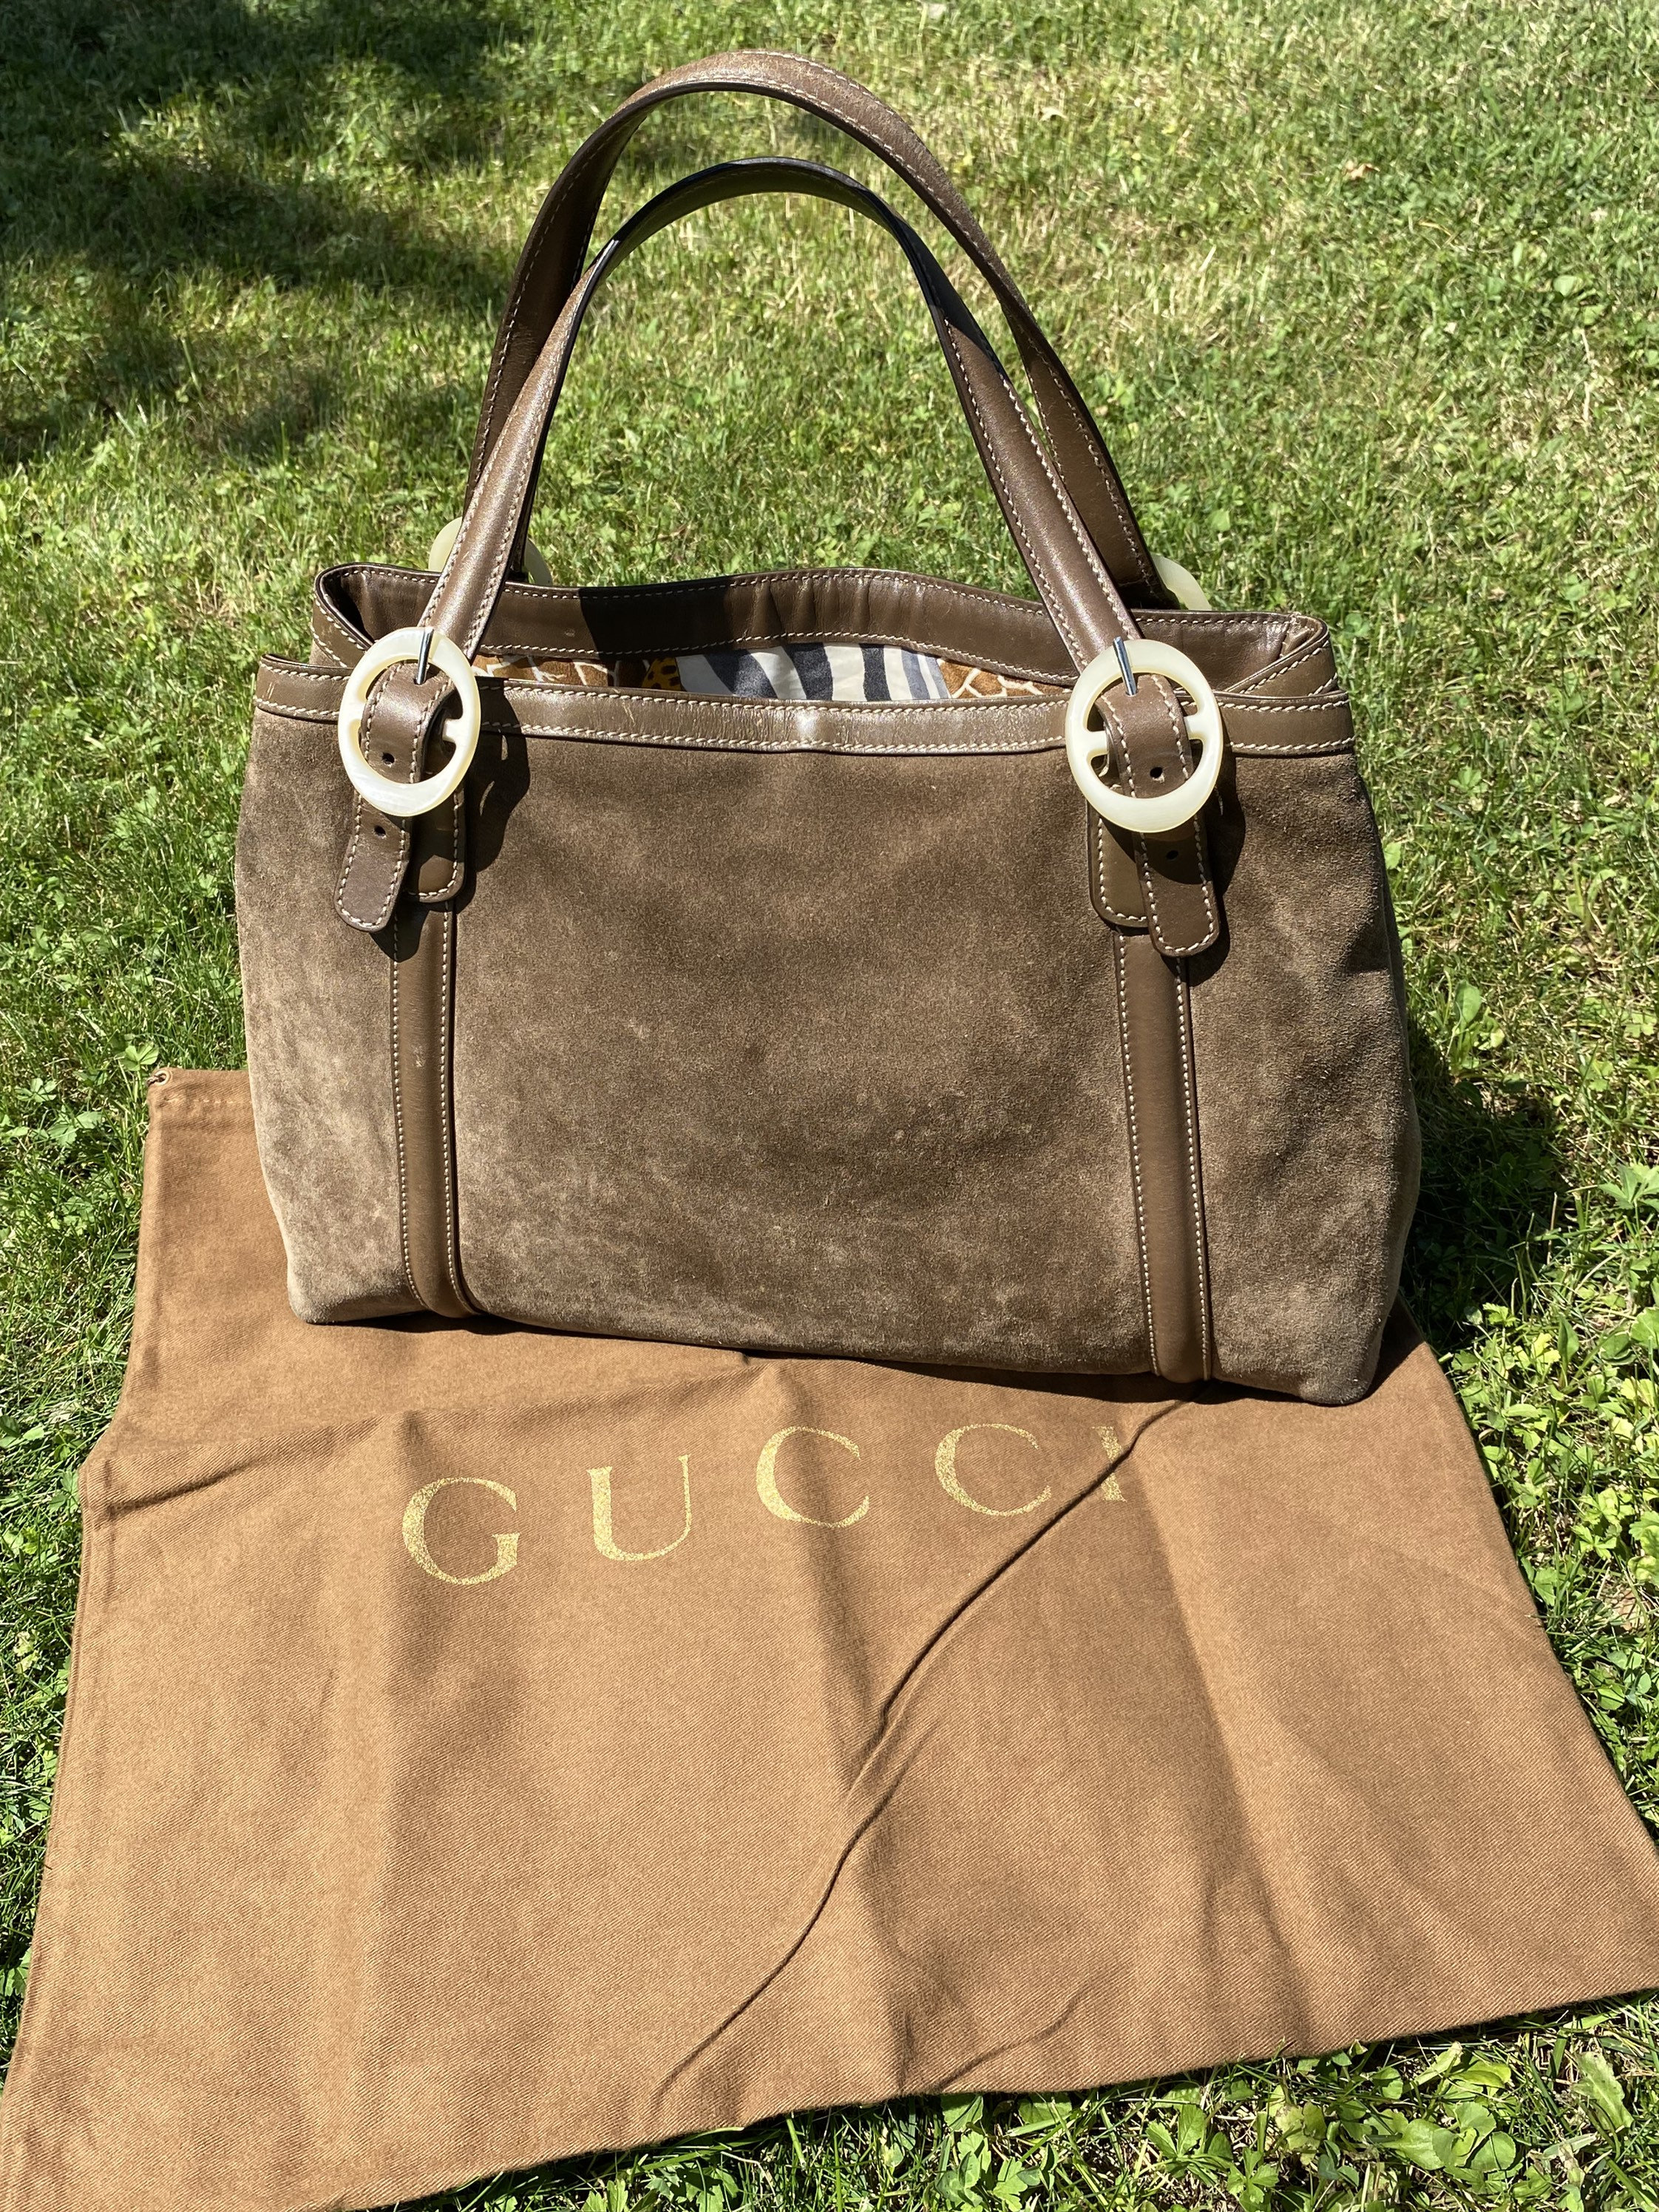 Auth Rare Vintage GUCCI Sherry Duffle Bag Tote Carry On Luxury Designer  Luggage